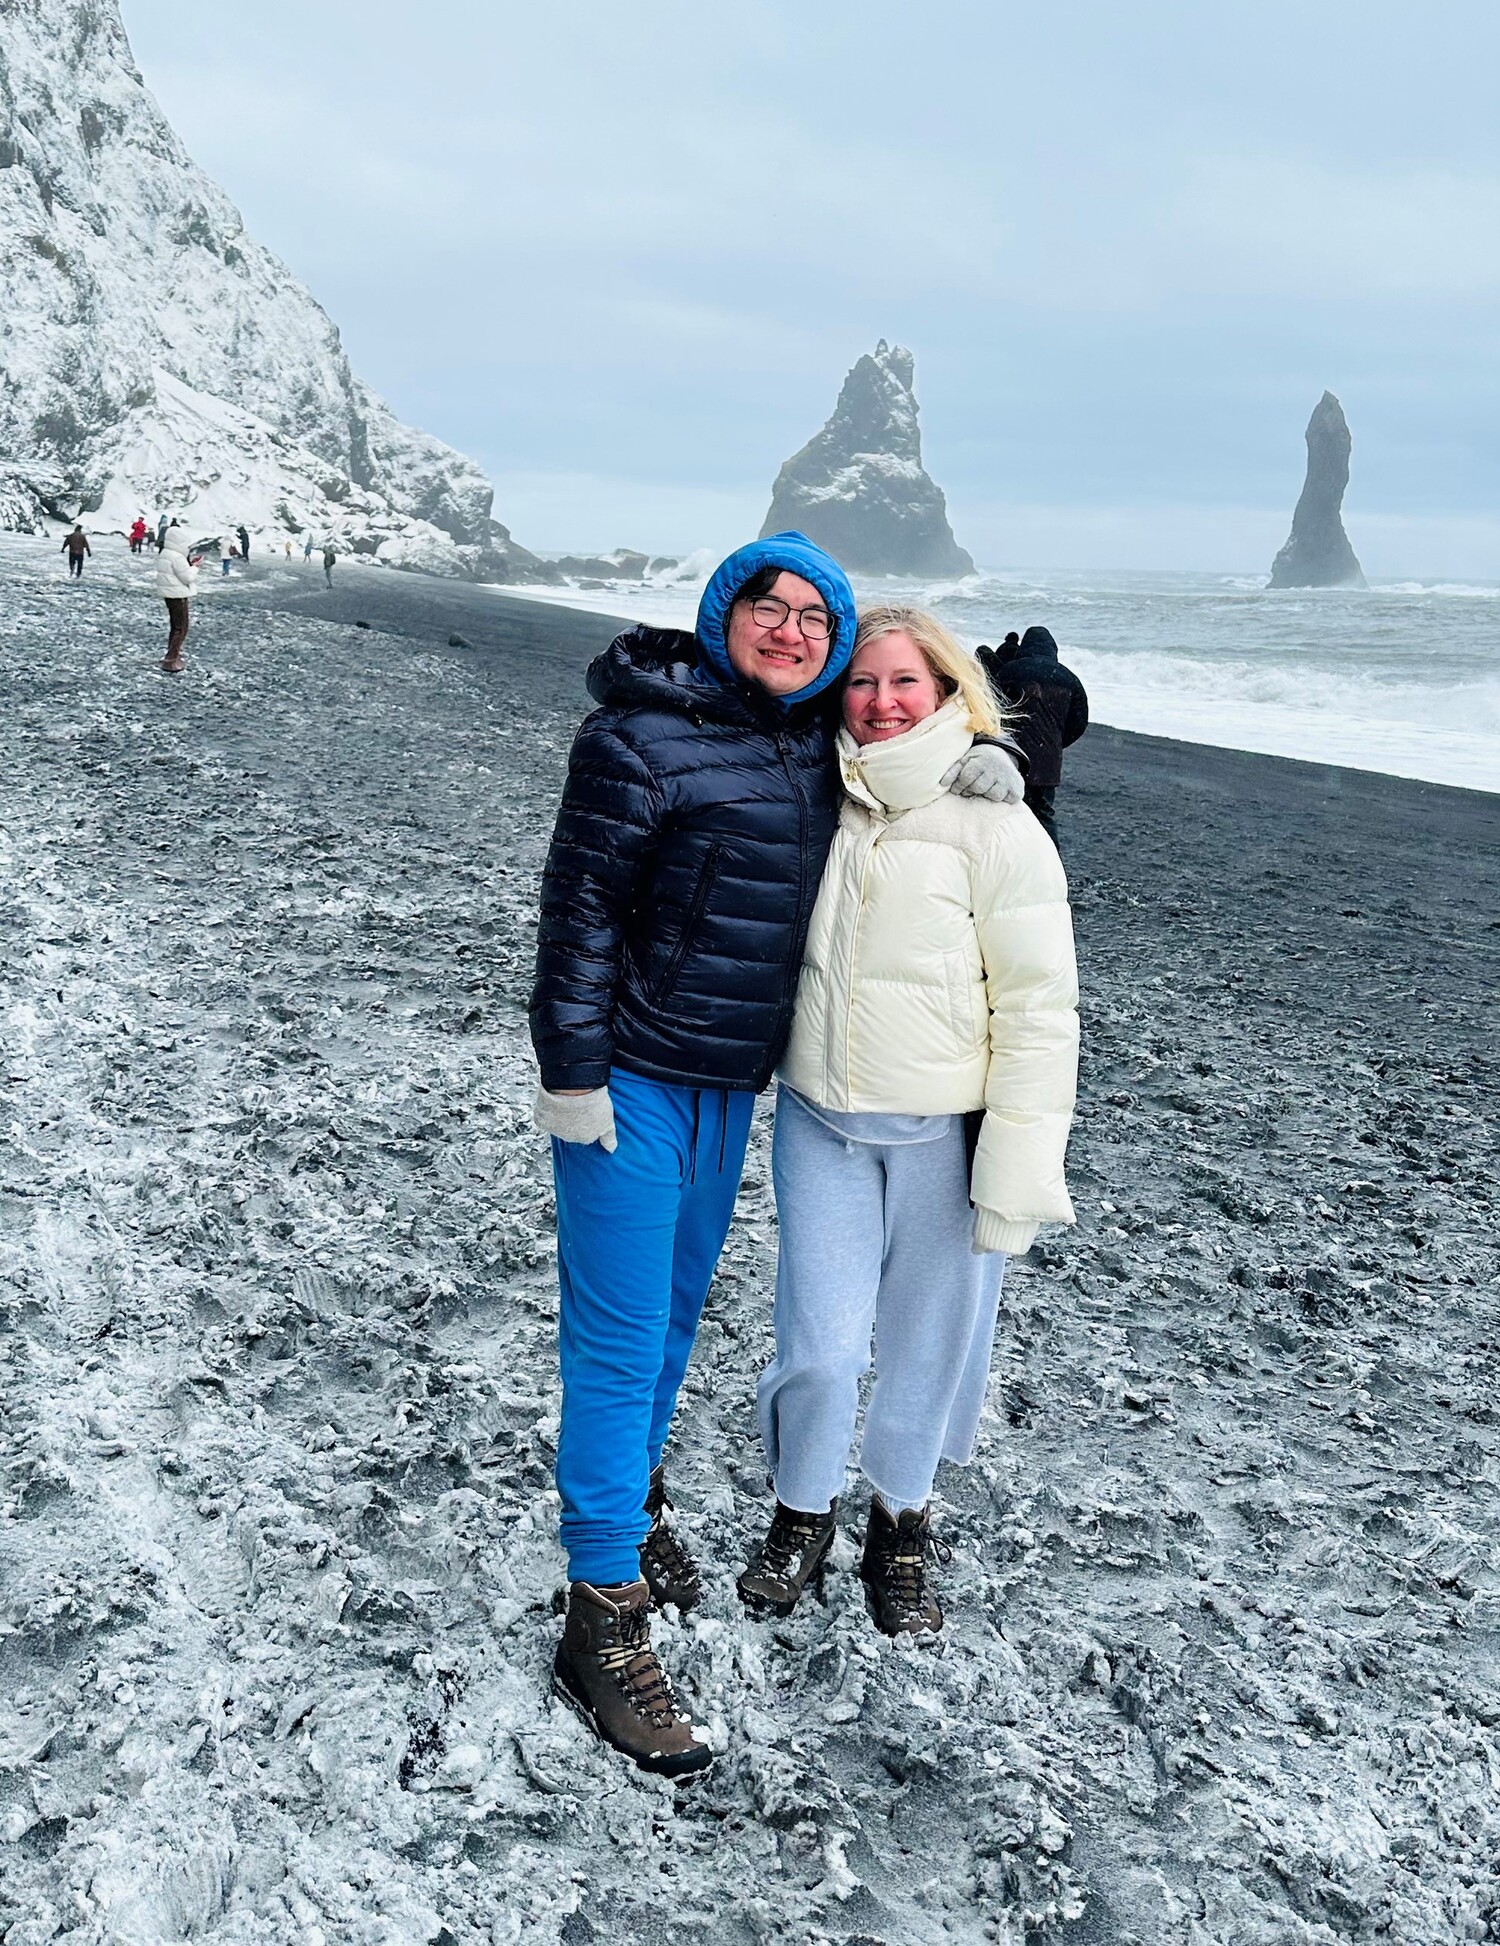 Ethan Li with his arm around his mom, Jeanne Farley, wearing winter clothes on a frost-covered beach